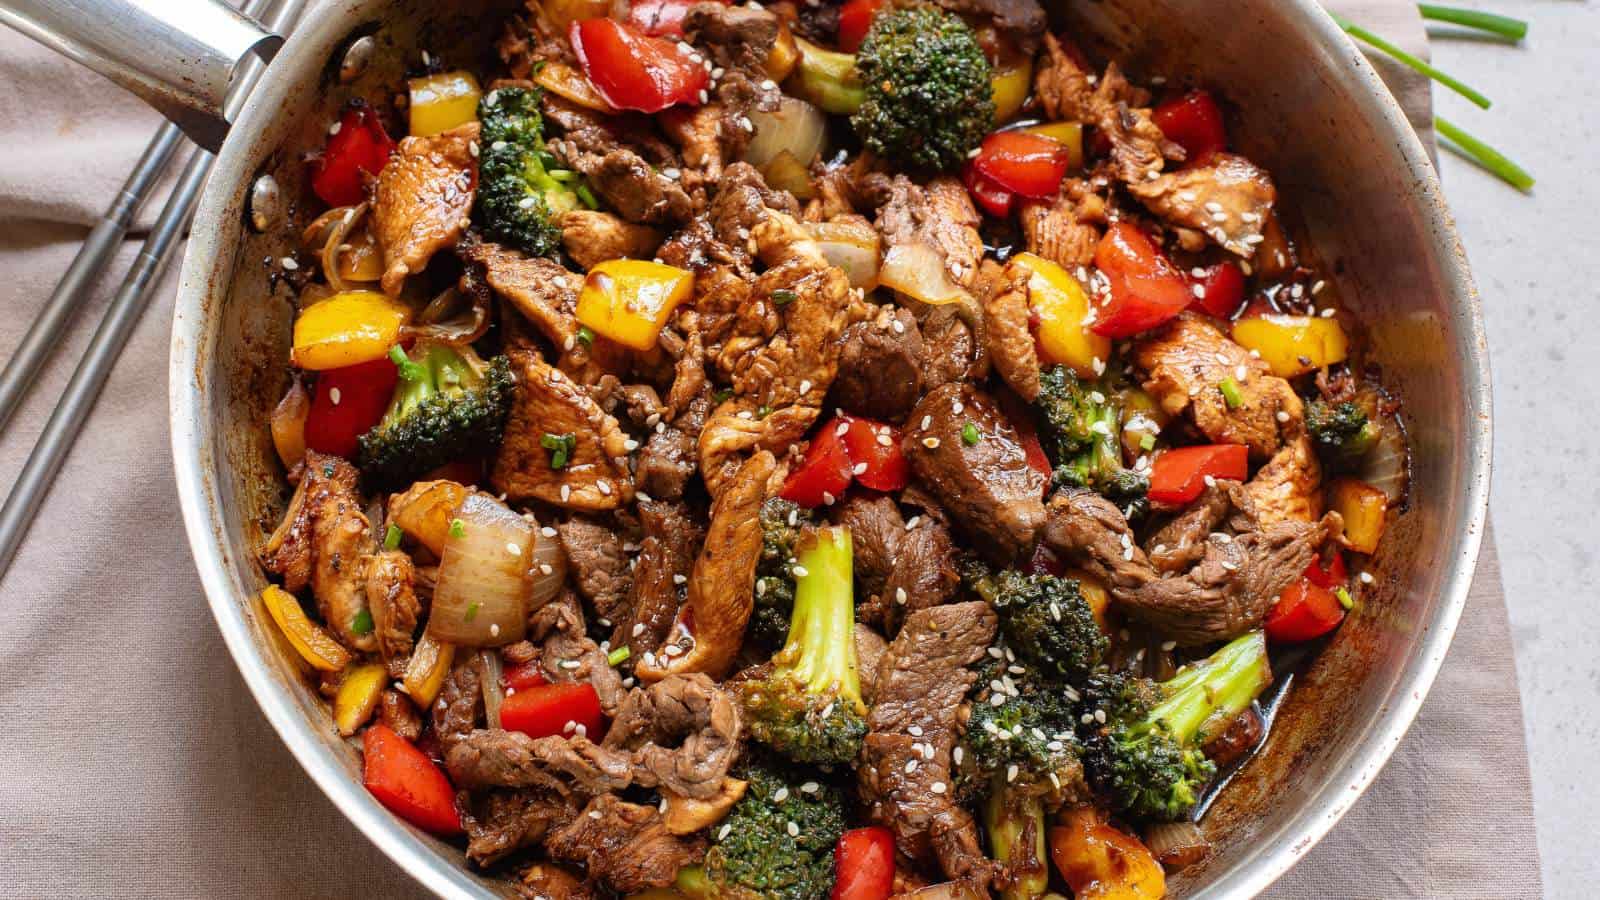 Chicken and steak stir fry with vegetables and sauce.